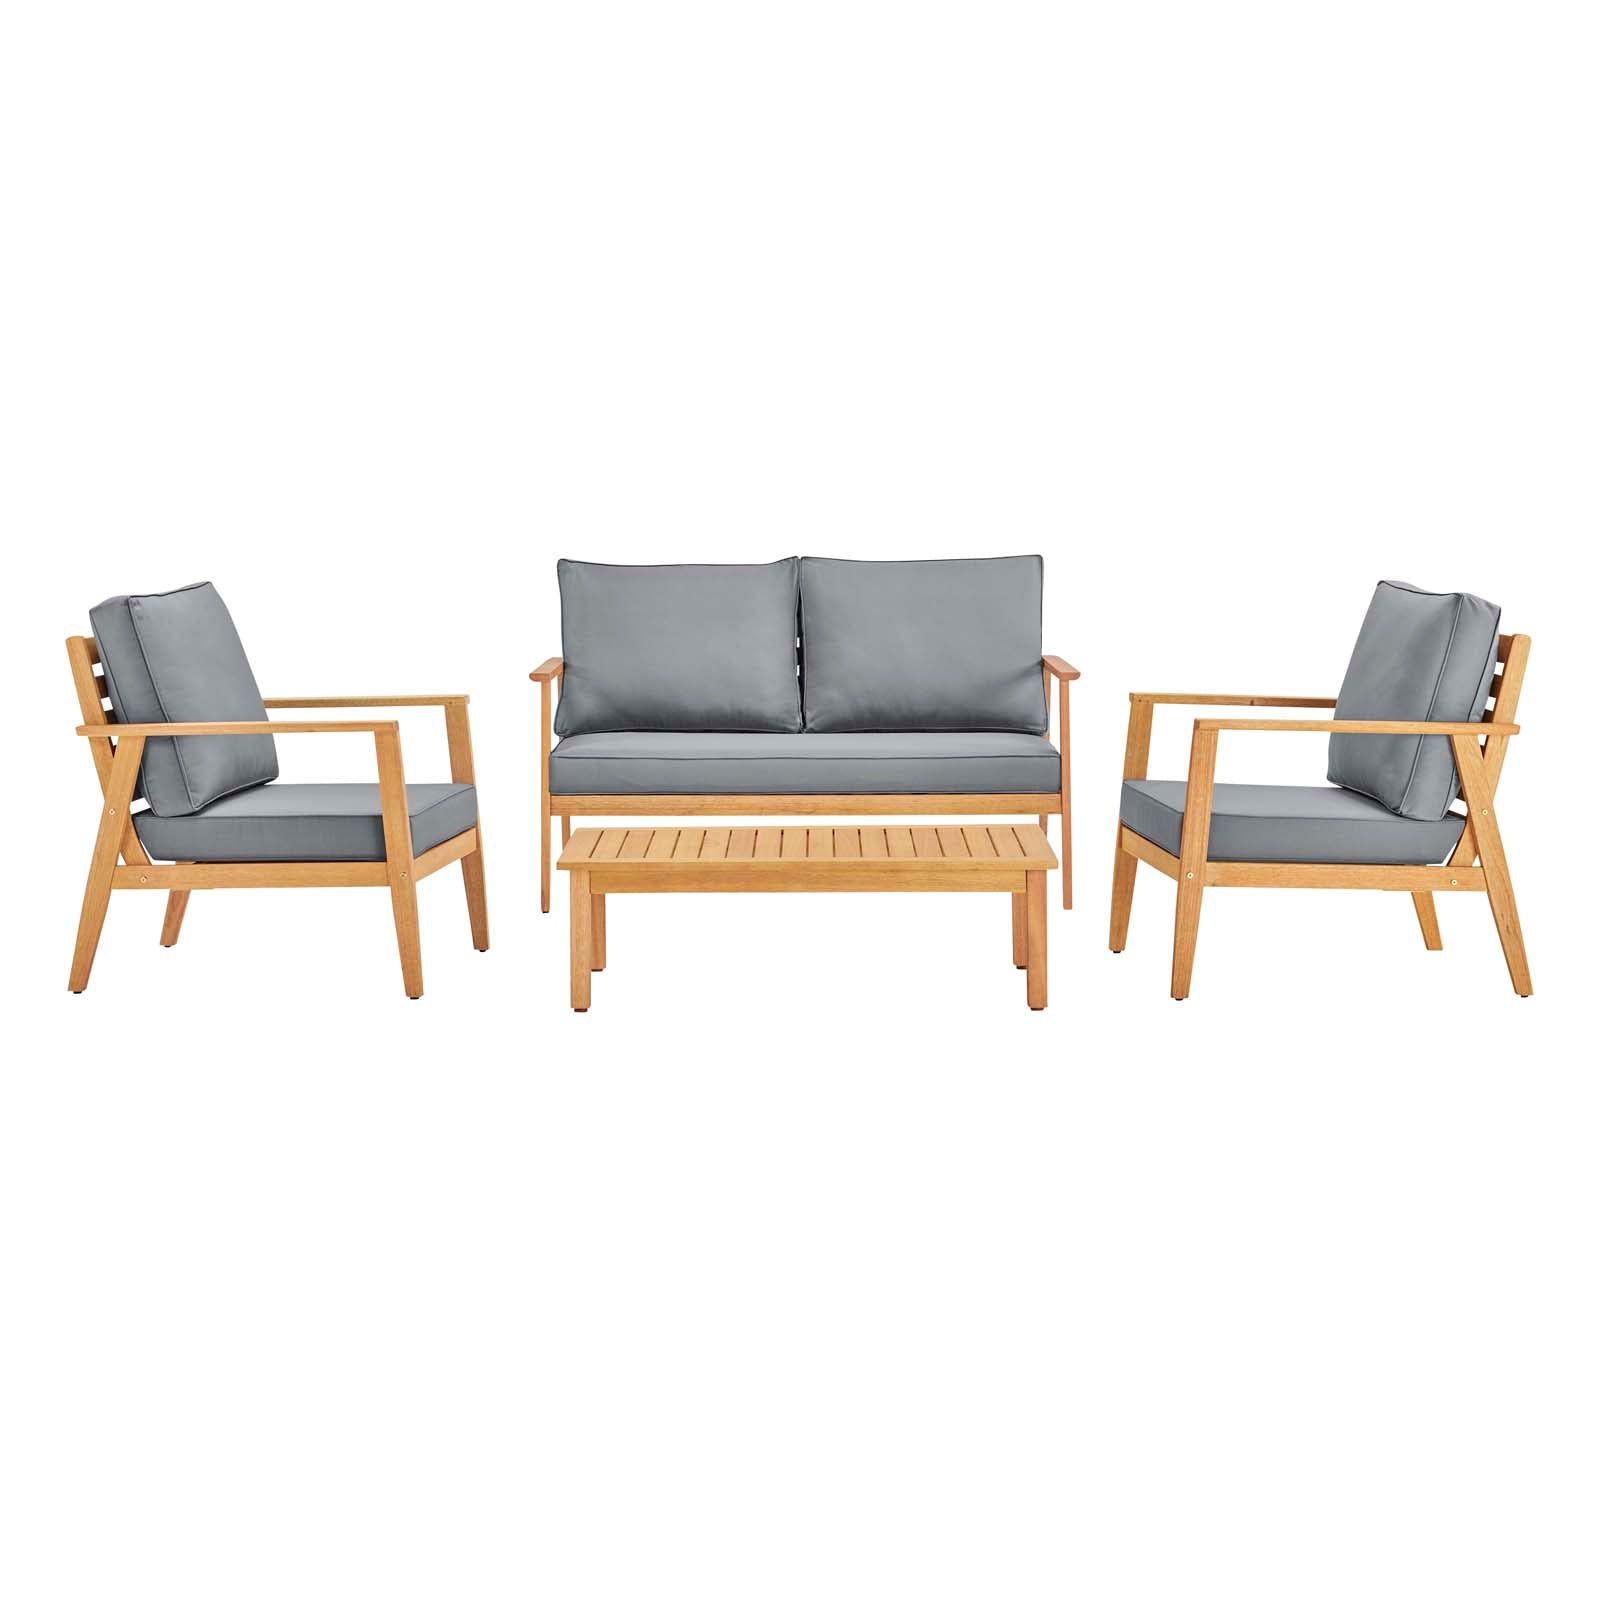 Syracuse Outdoor Patio Upholstered 4 Piece Furniture Set